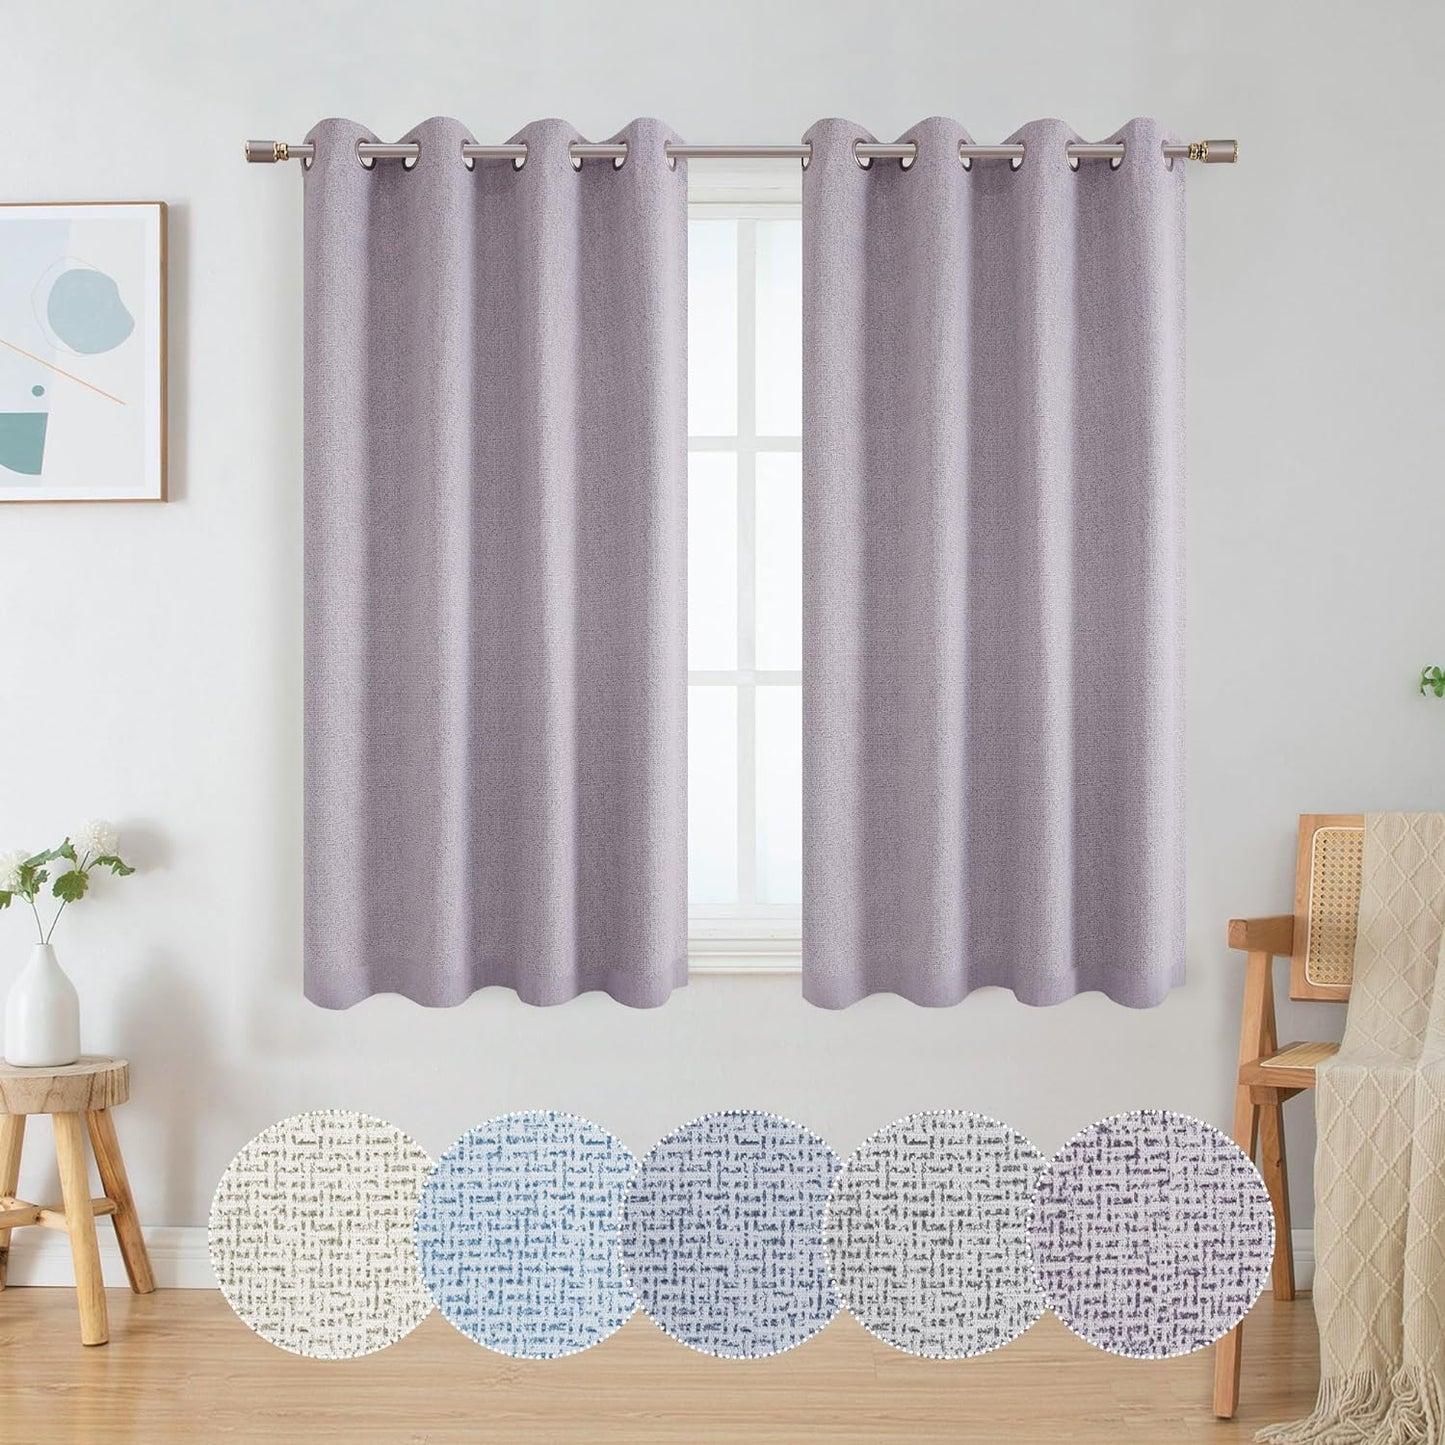 OWENIE Luke Black Out Curtains 63 Inch Long 2 Panels for Bedroom, Geometric Printed Completely Blackout Room Darkening Curtains, Grommet Thermal Insulated Living Room Curtain, 2 PCS, Each 42Wx63L Inch  OWENIE Purple 42"W X 45"L | 2 Pcs 